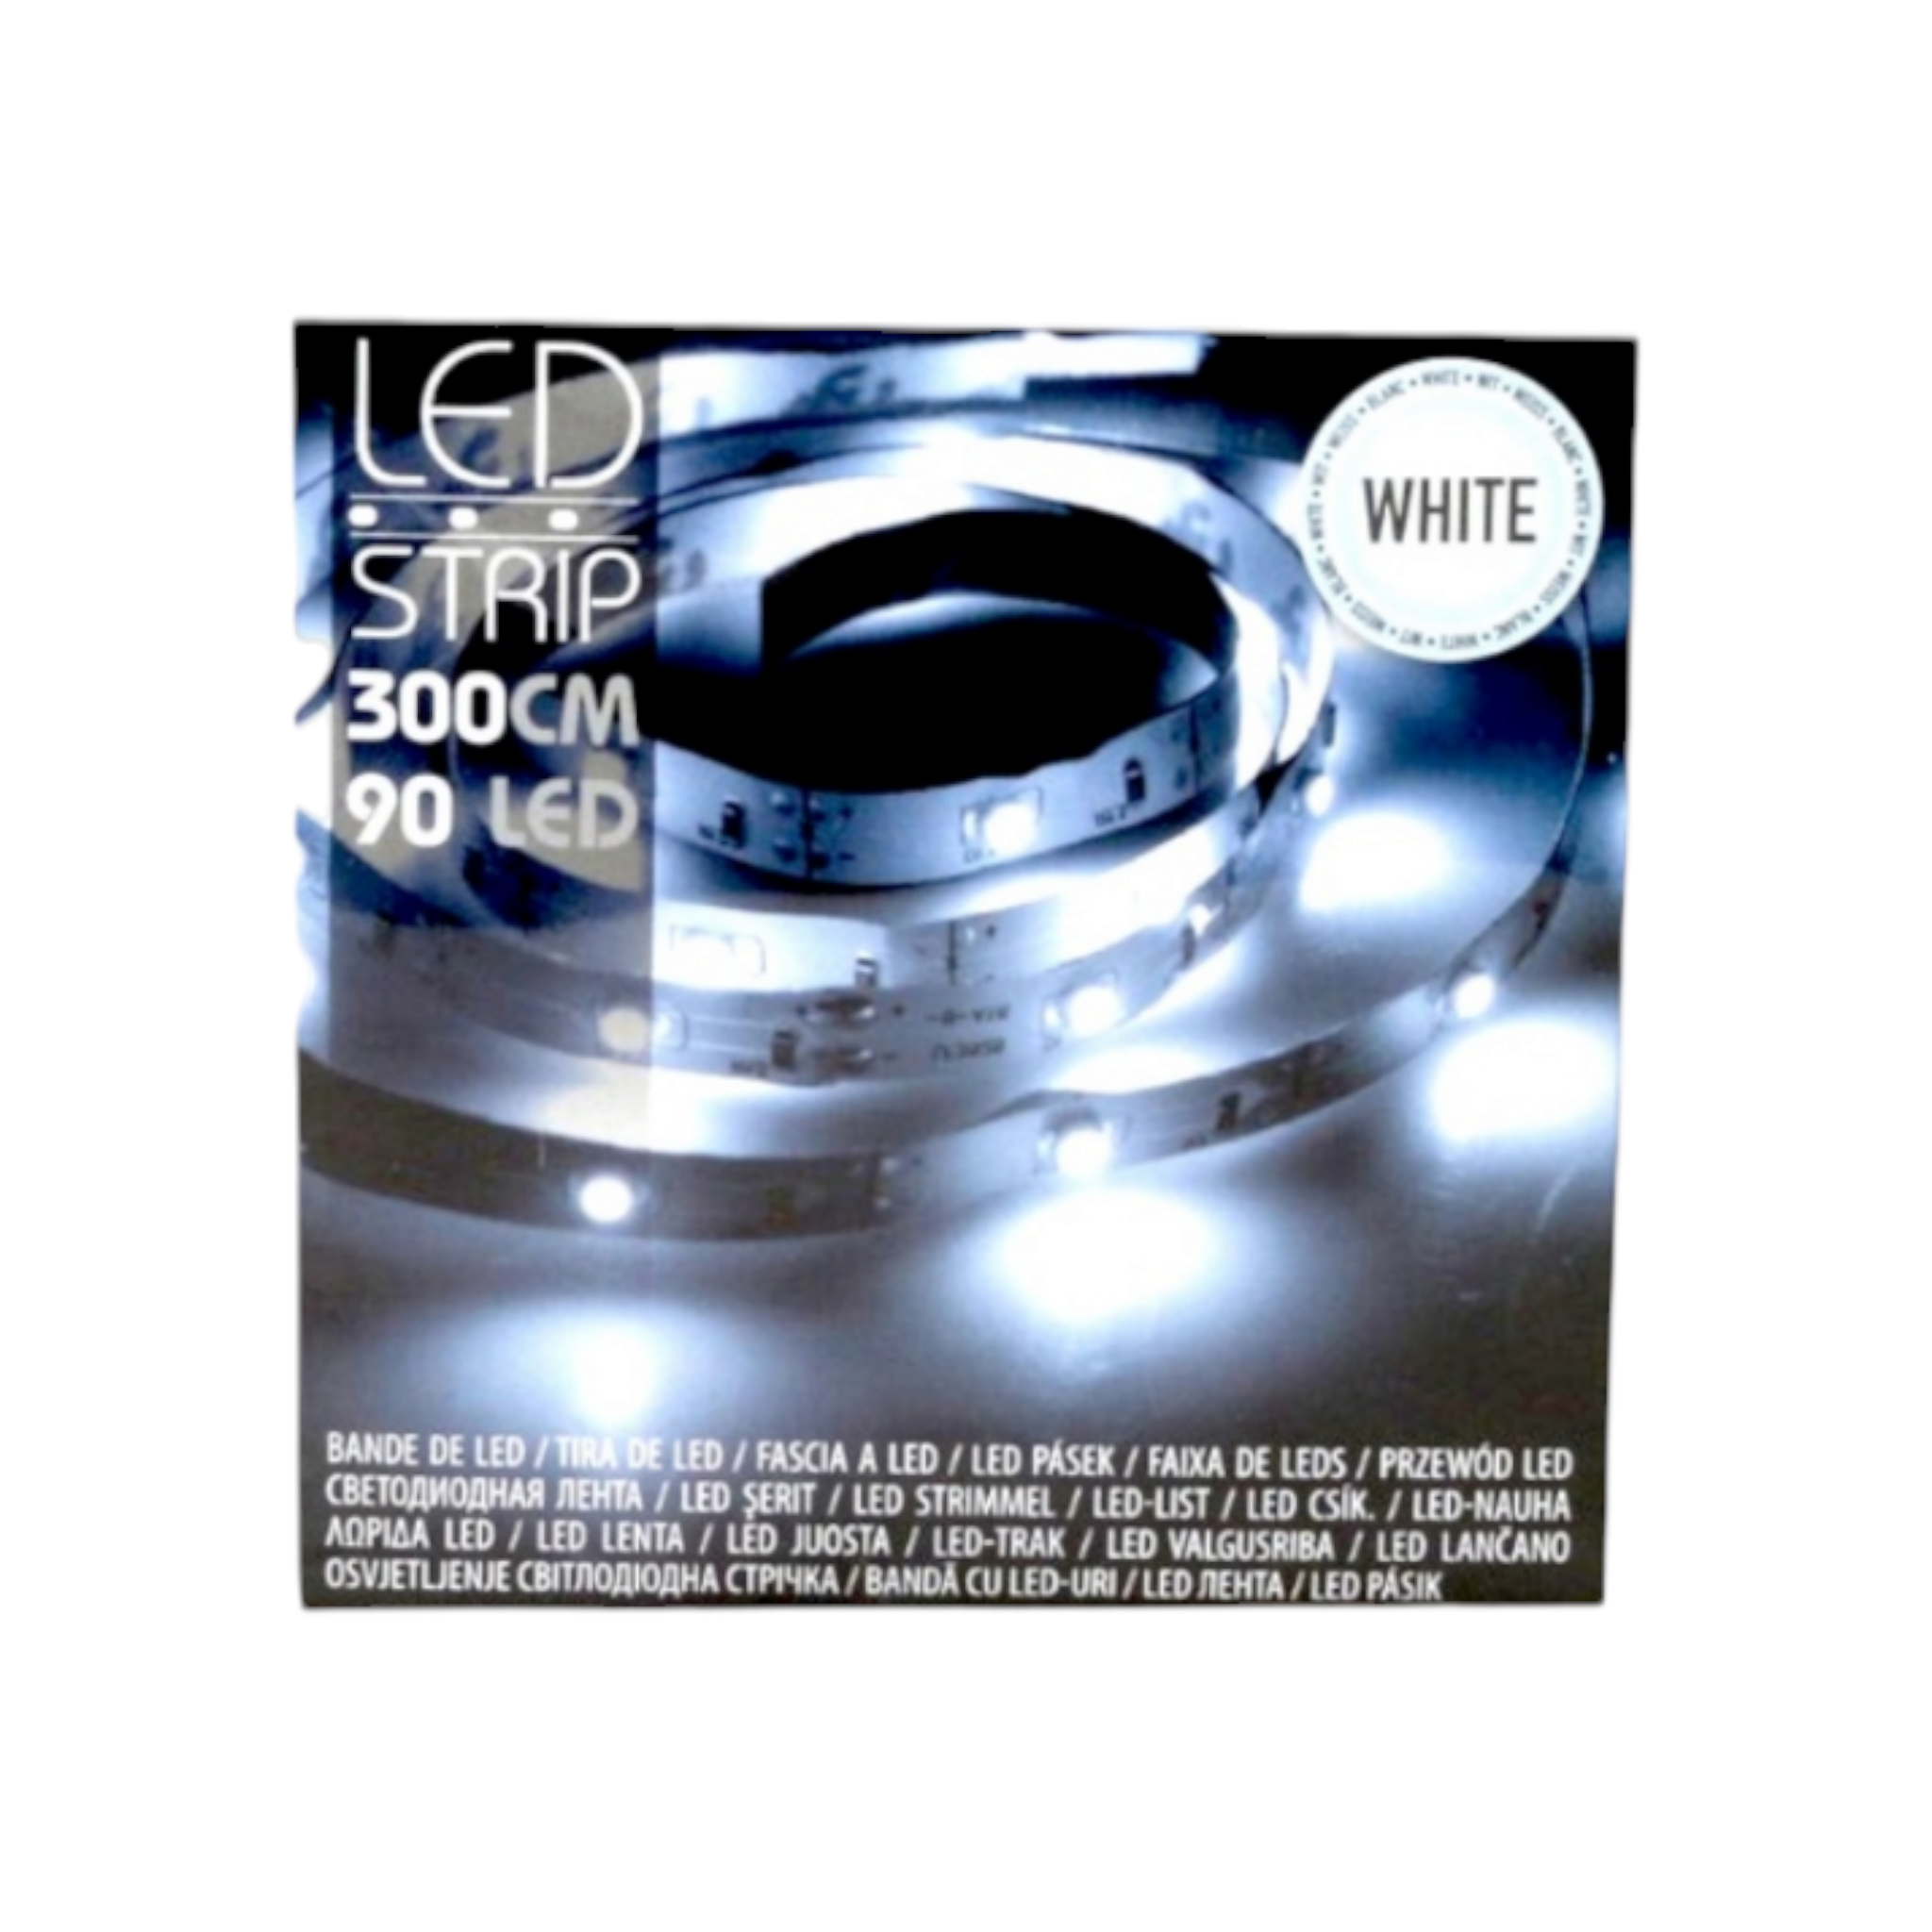 Koopman Led Strip Light 3m 30-Leds Cold White Battery operated Internal Garland with Illumination 22300